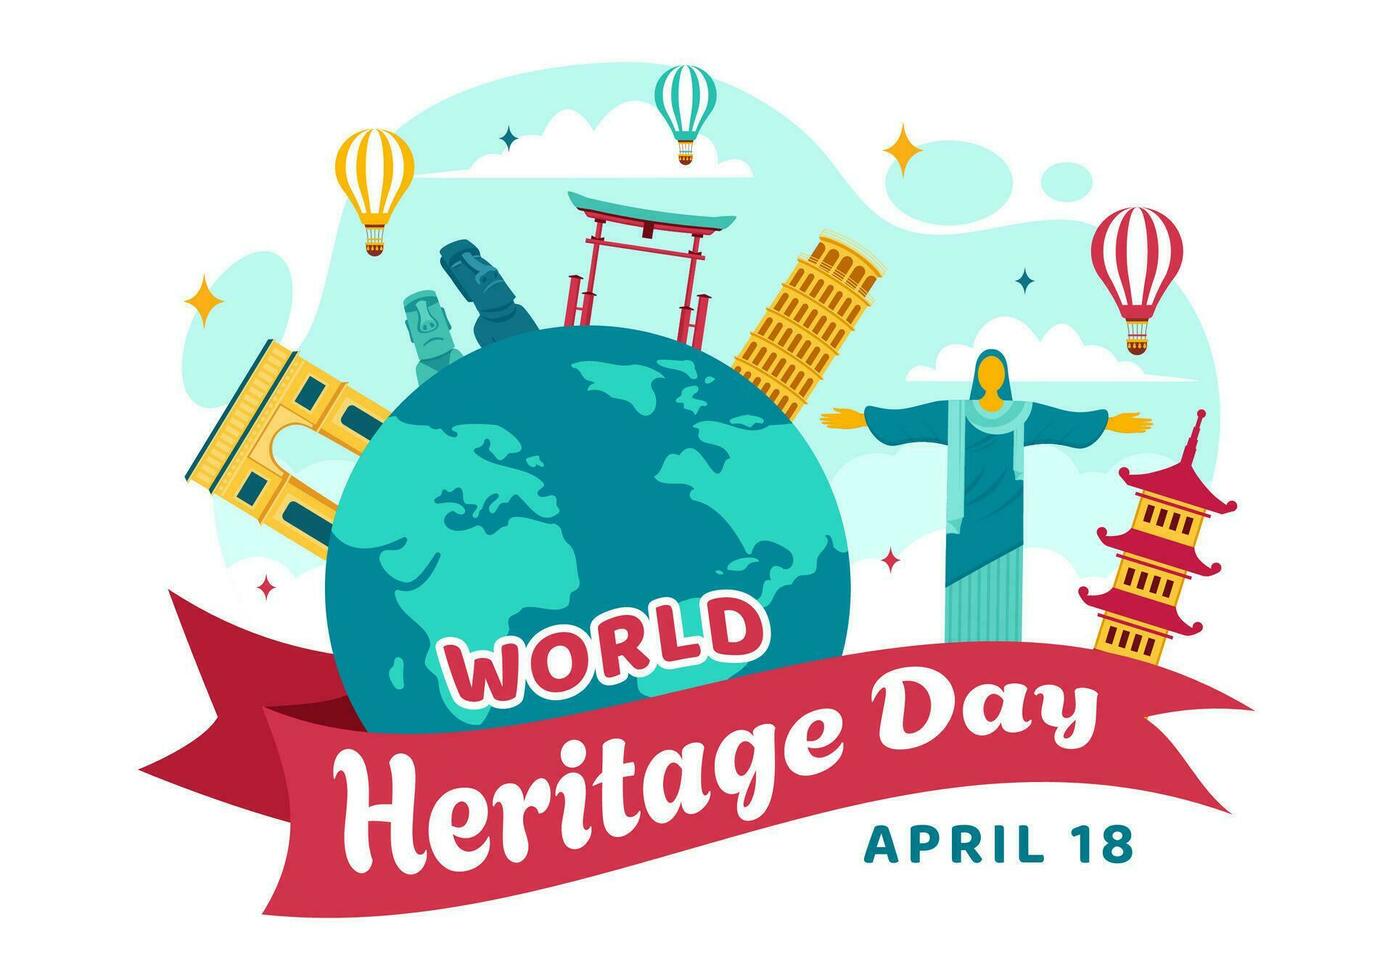 World Heritage Day Vector Illustration on 18 April for Commemorative Monuments and Sites from Various Countries in Flat Background